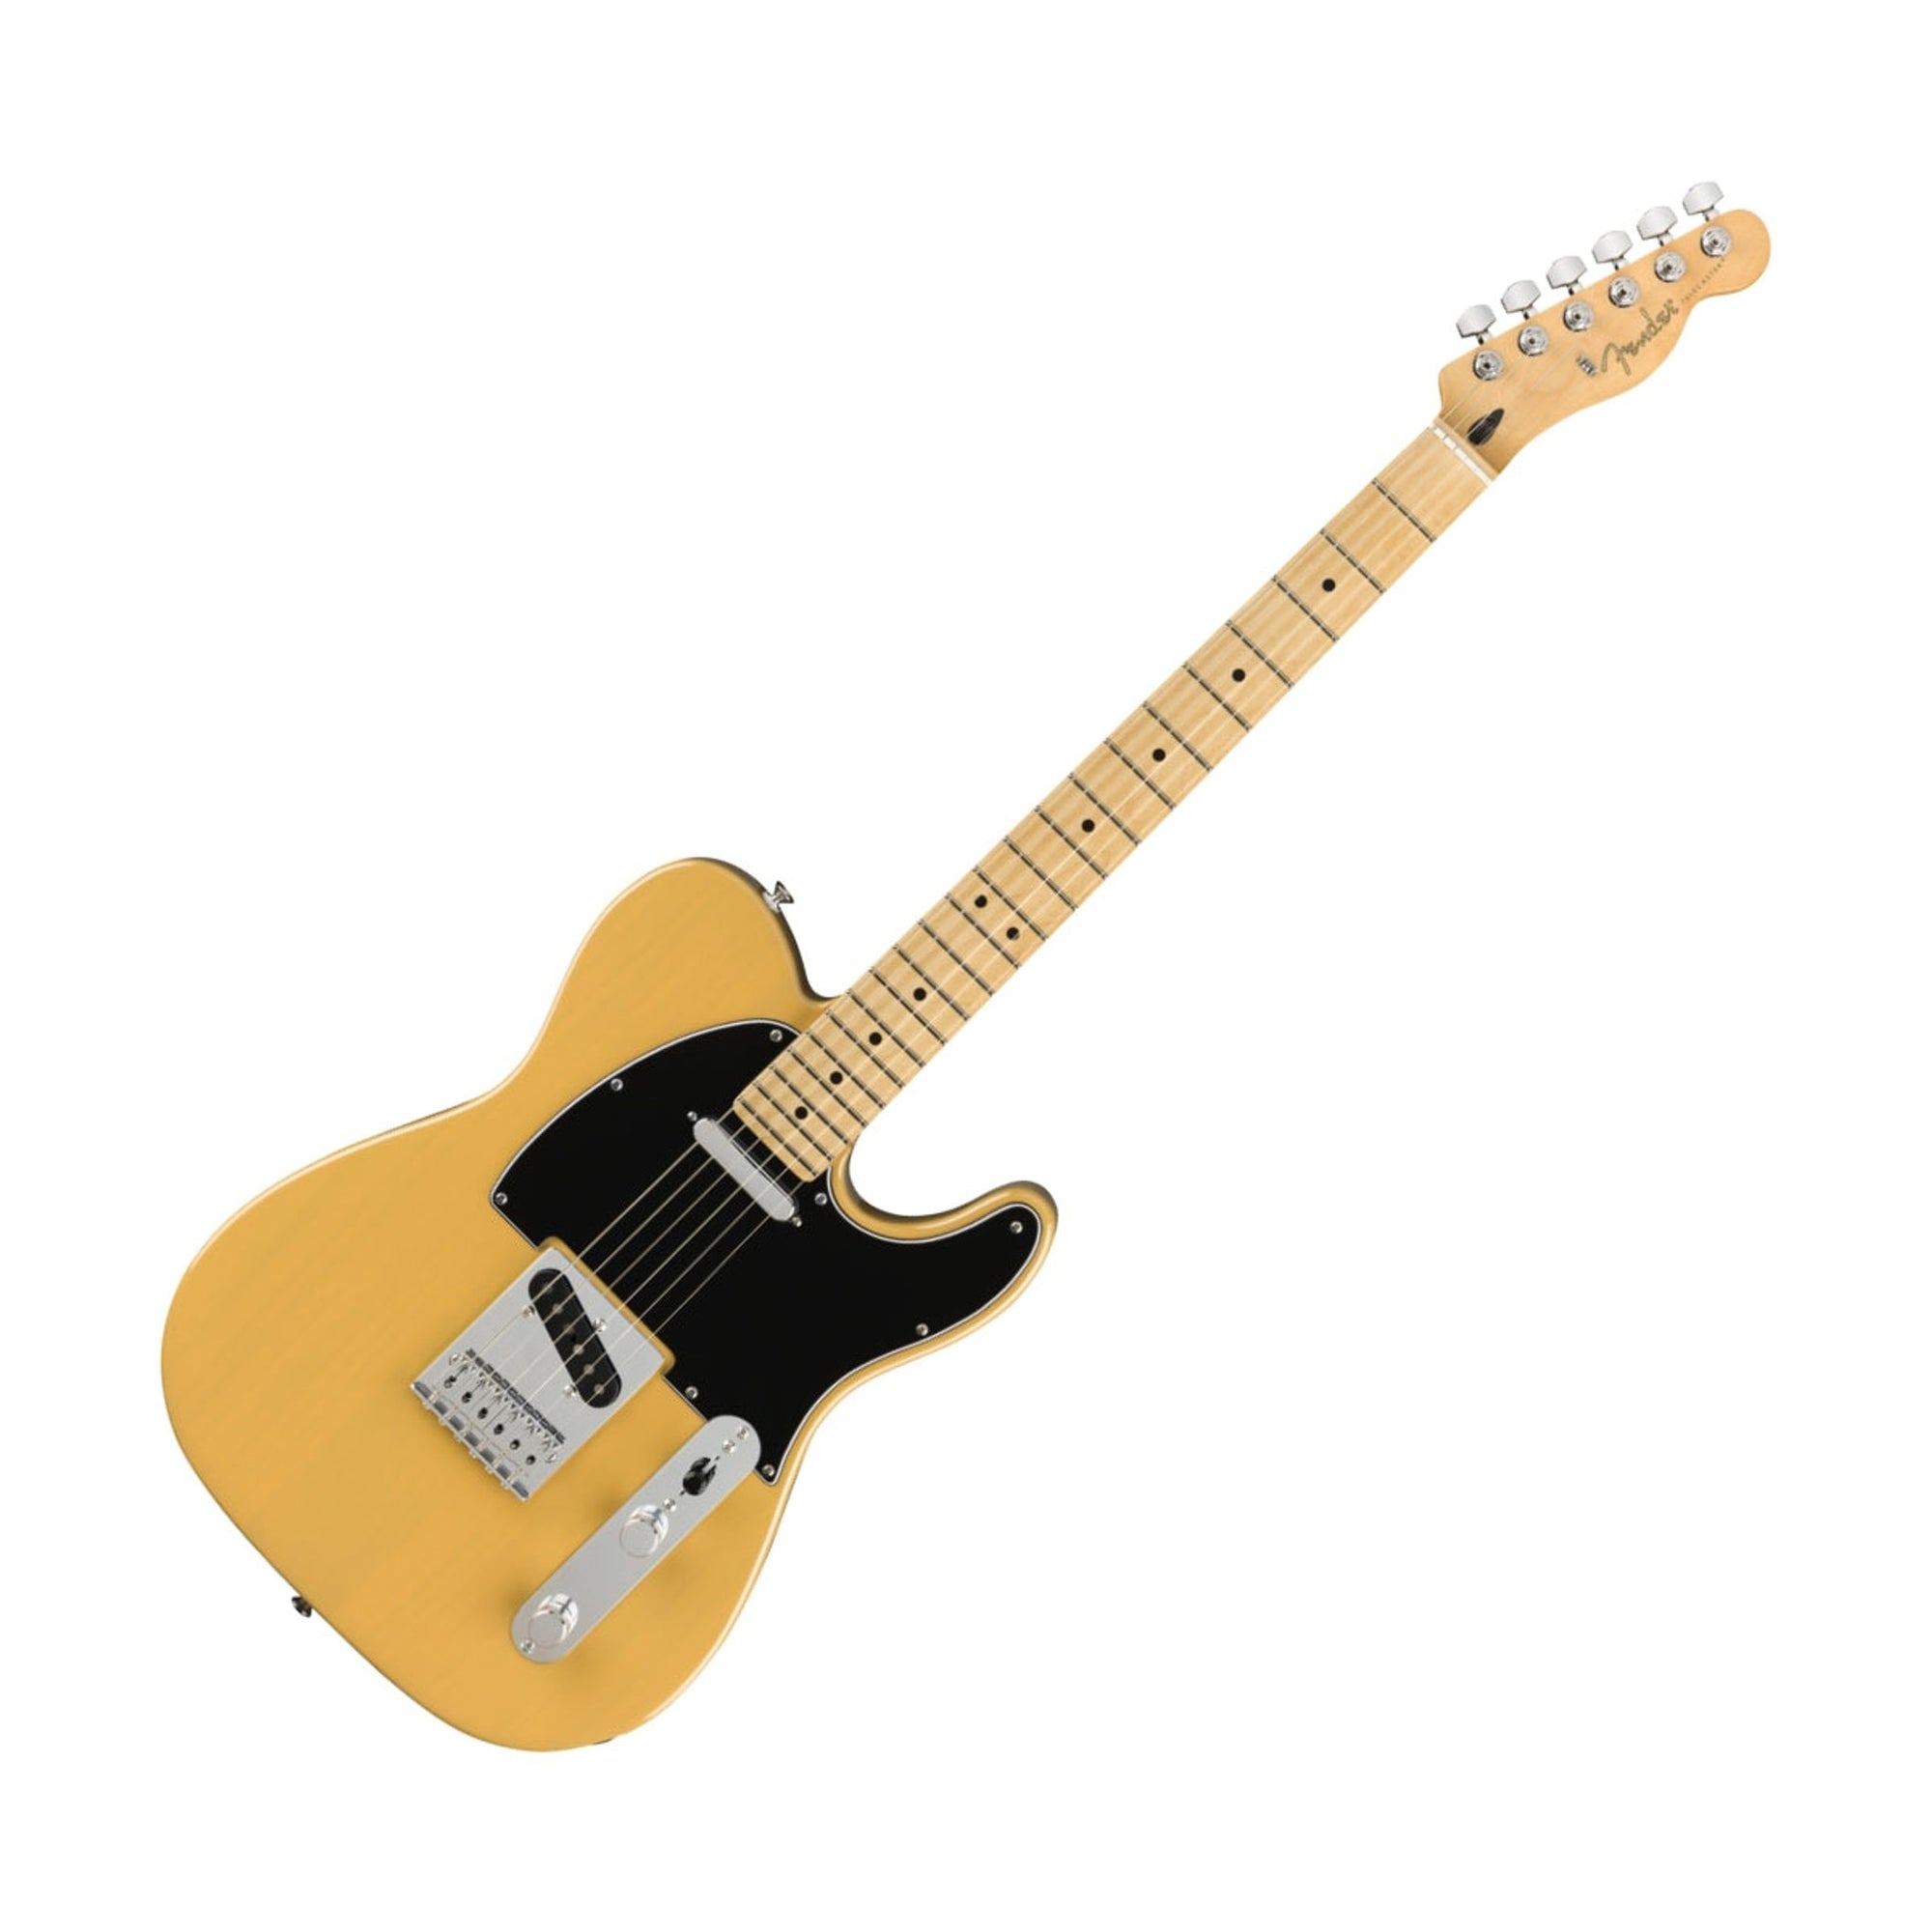 The Fender Telecaster Player Series is bold, innovative and rugged and is pure Fender, through and through.